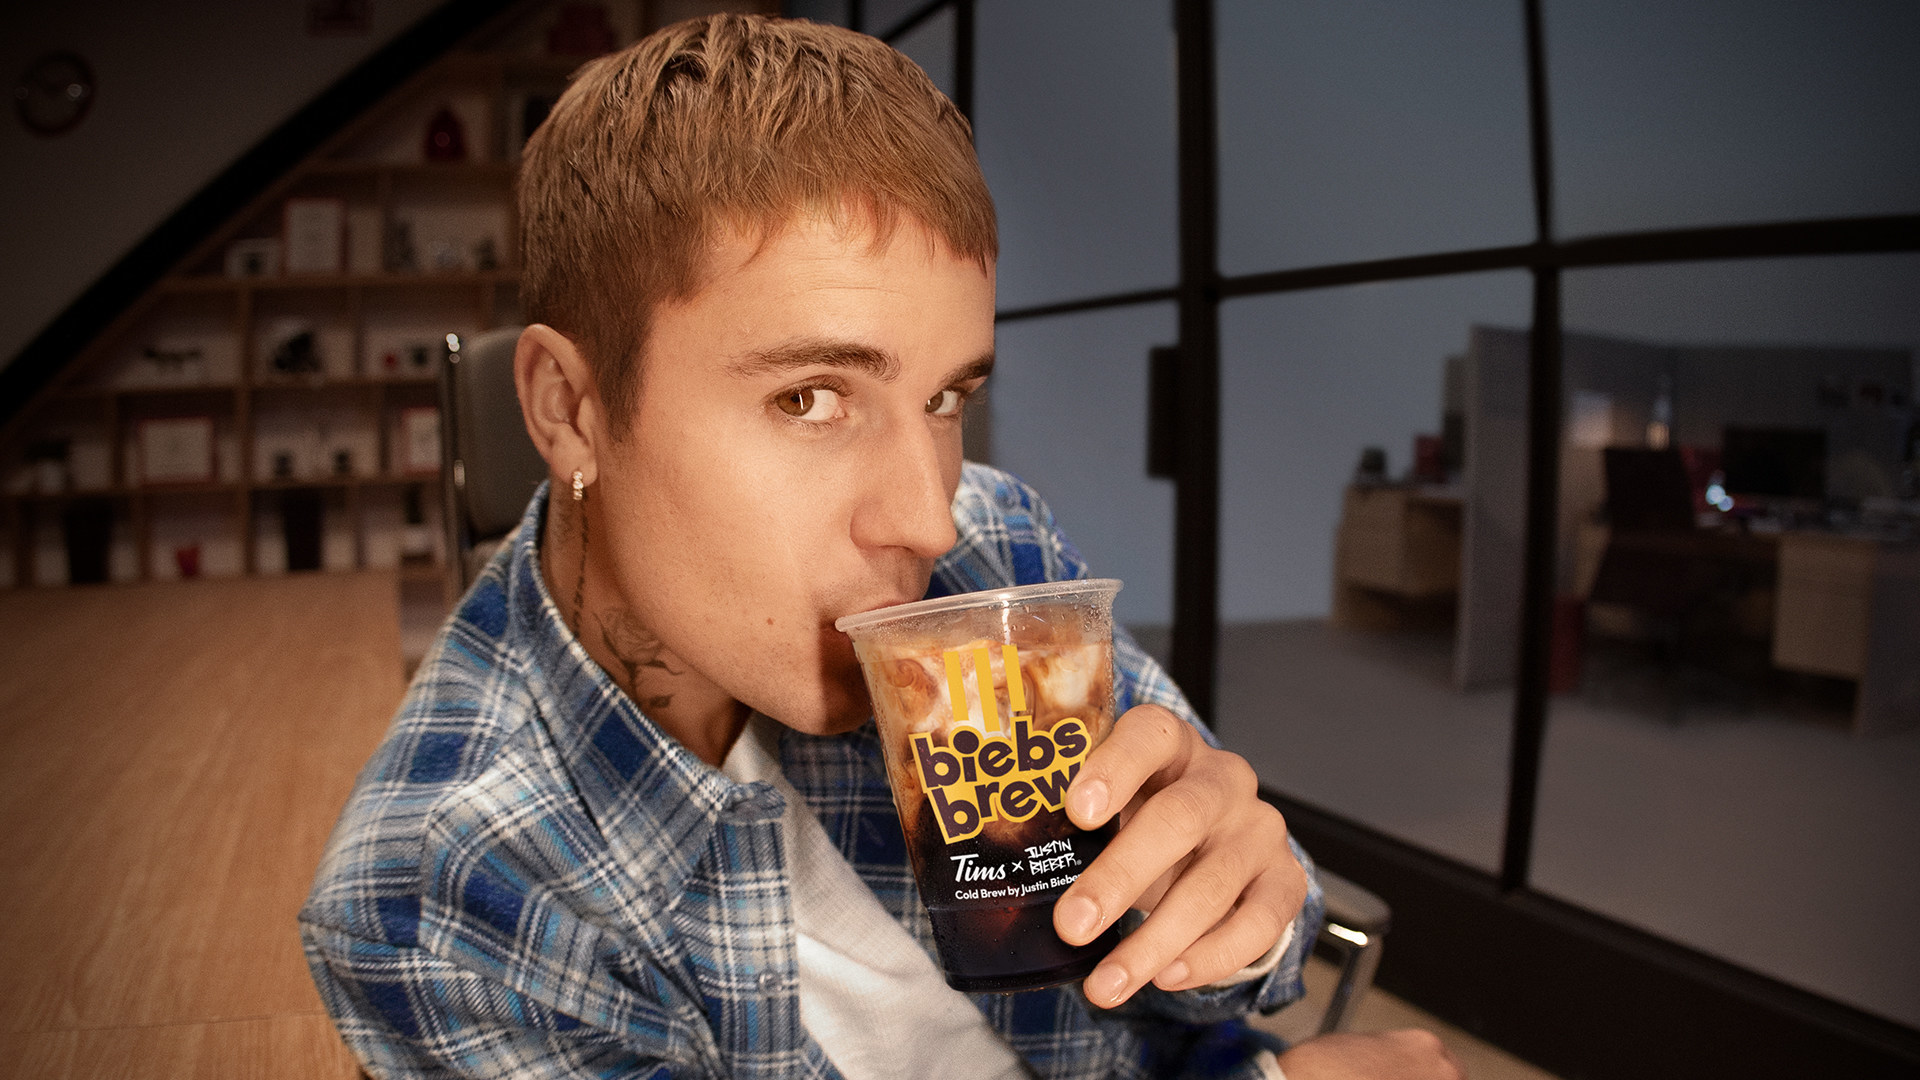 Tim Hortons-Biebs Brew is now available at Tim Hortons- The much